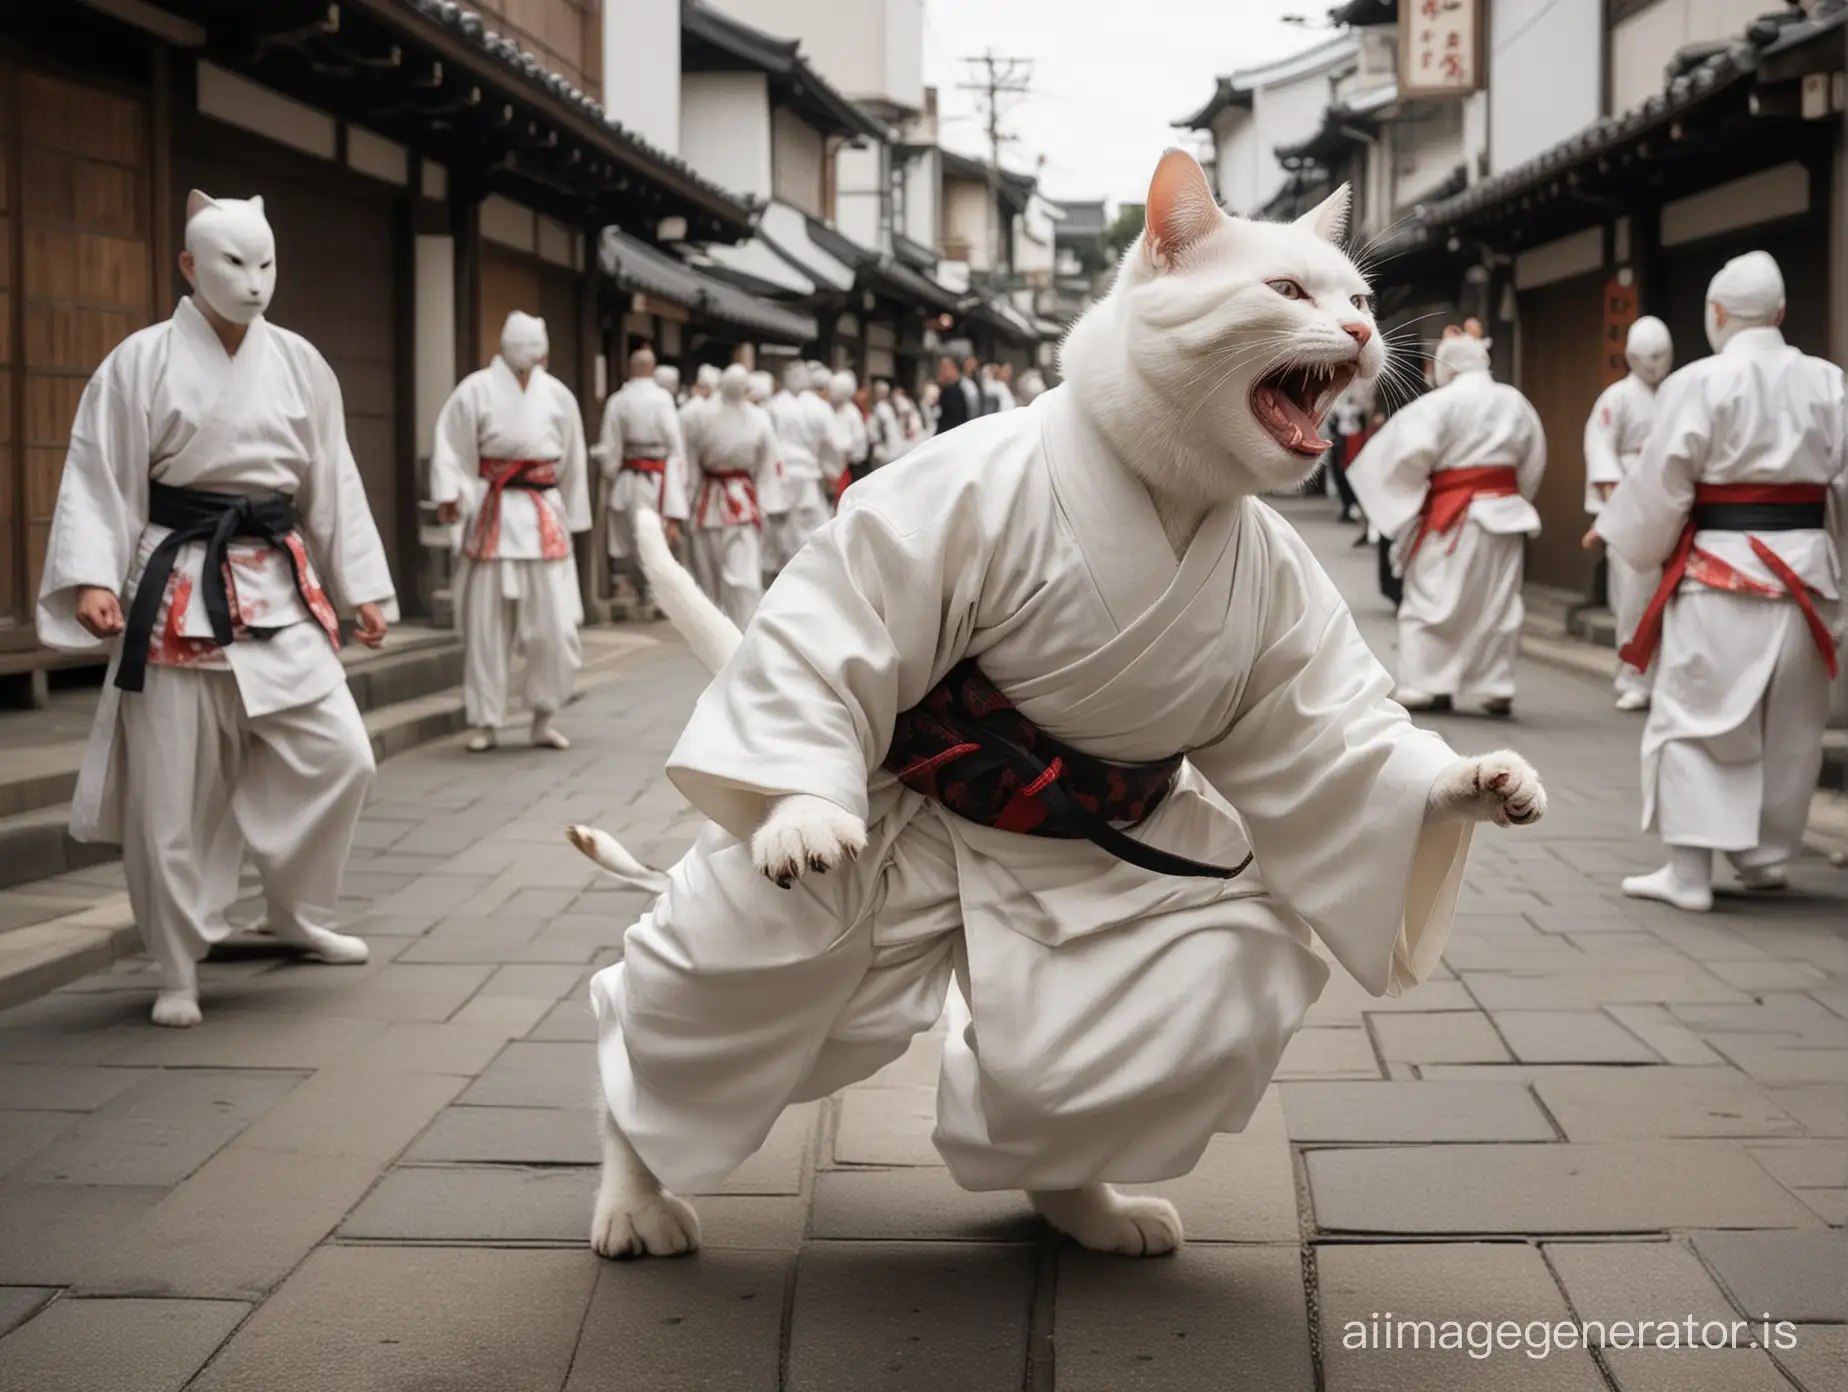 Energetic-White-Cat-Practicing-Eastern-Martial-Arts-in-16th-Century-Japanese-Attire-on-Tokyo-Streets